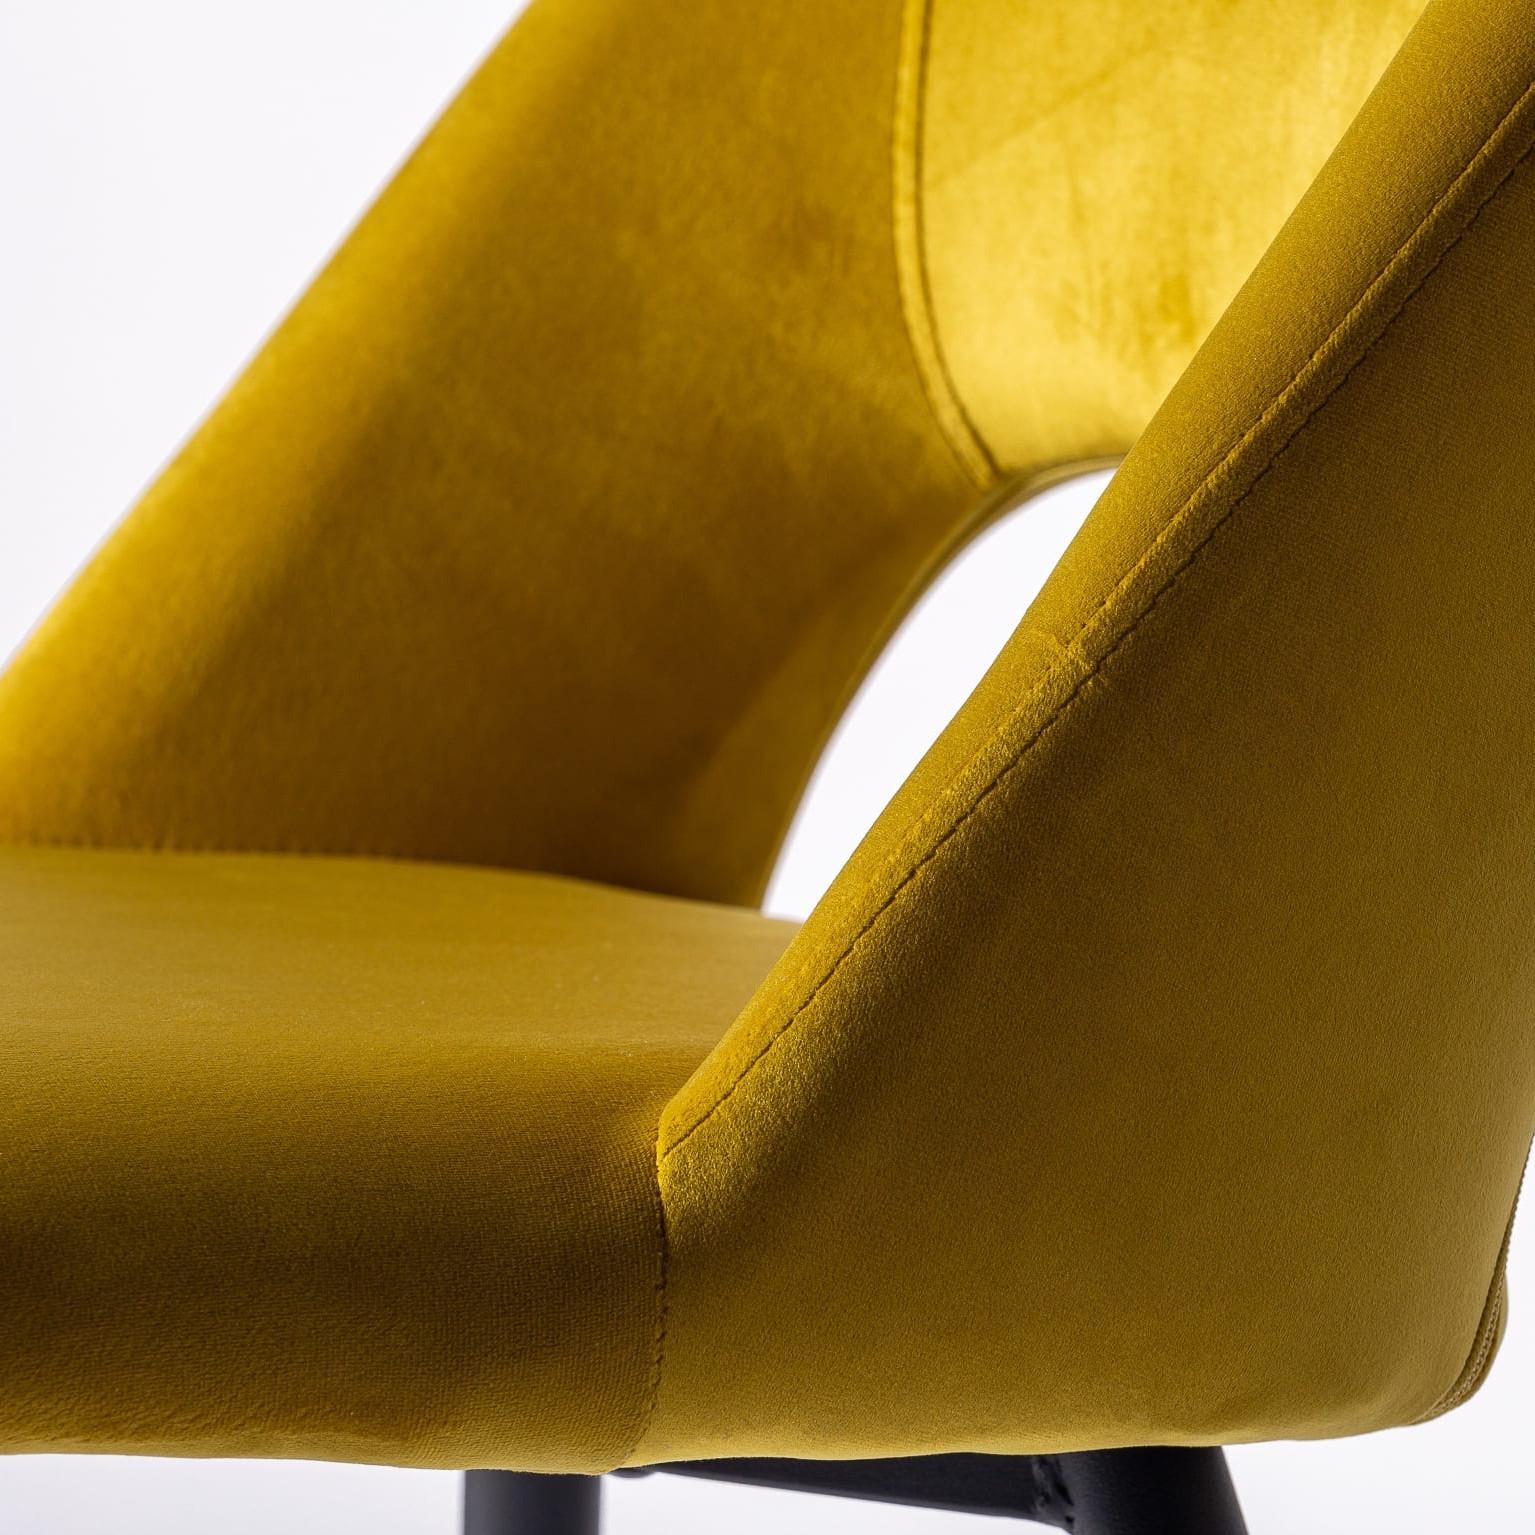 1950s design style yellow velvet chair with black lacquered stainless steel feet and gild metal finishes.